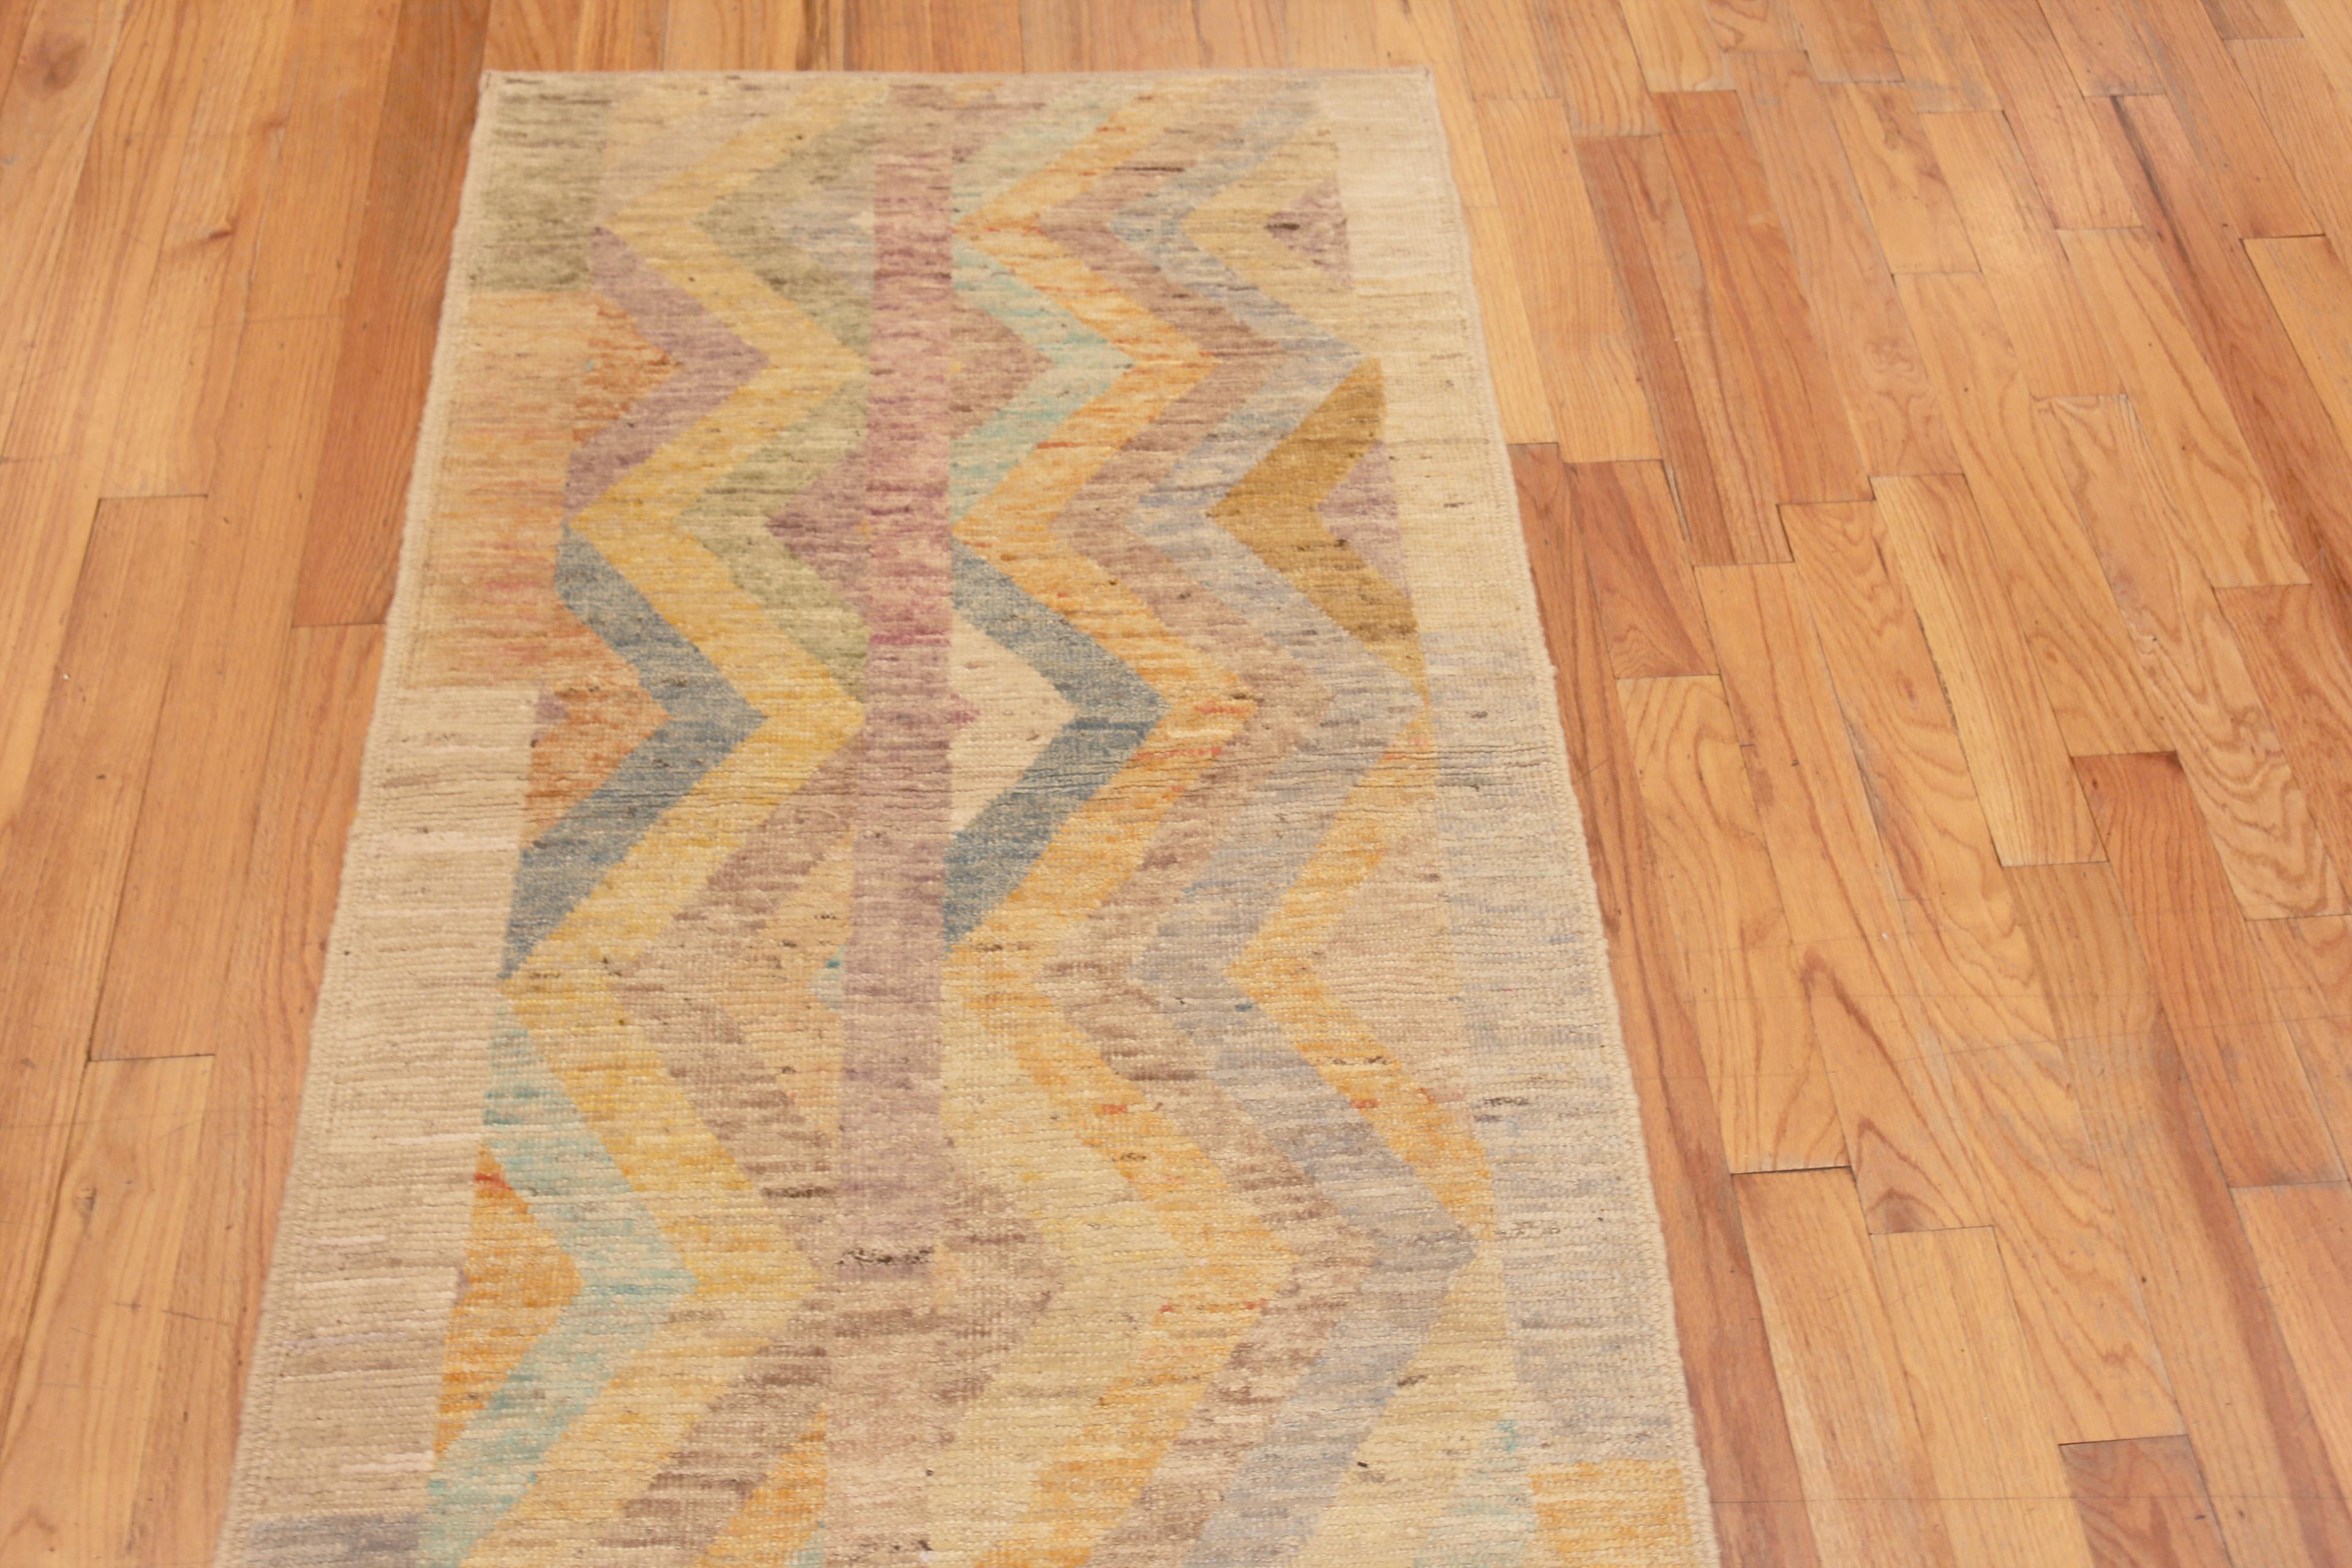 An Artistic And Decorative Rustic Colorful Tribal Geometric Chevron Design Hallway Runner Rug, Country of Origin: Central Asia, Circa Date: Modern Rug 